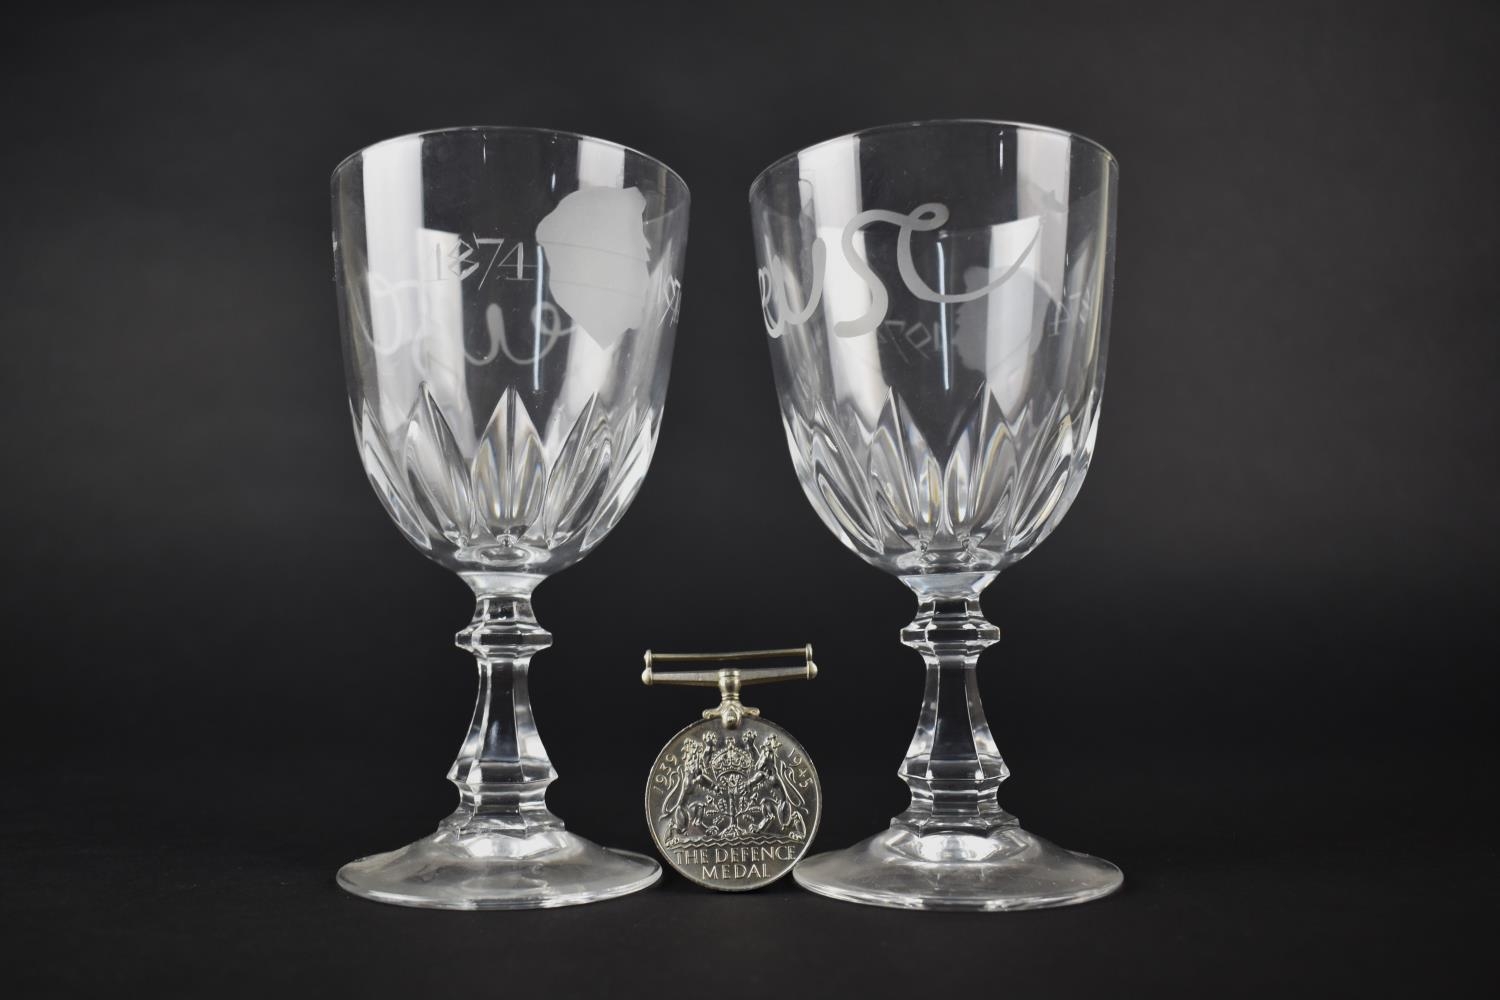 Two Limited Hand Engraved Glasses for The Churchill Centenary - 1874-1974, Together with a 1939-1945 - Image 5 of 5